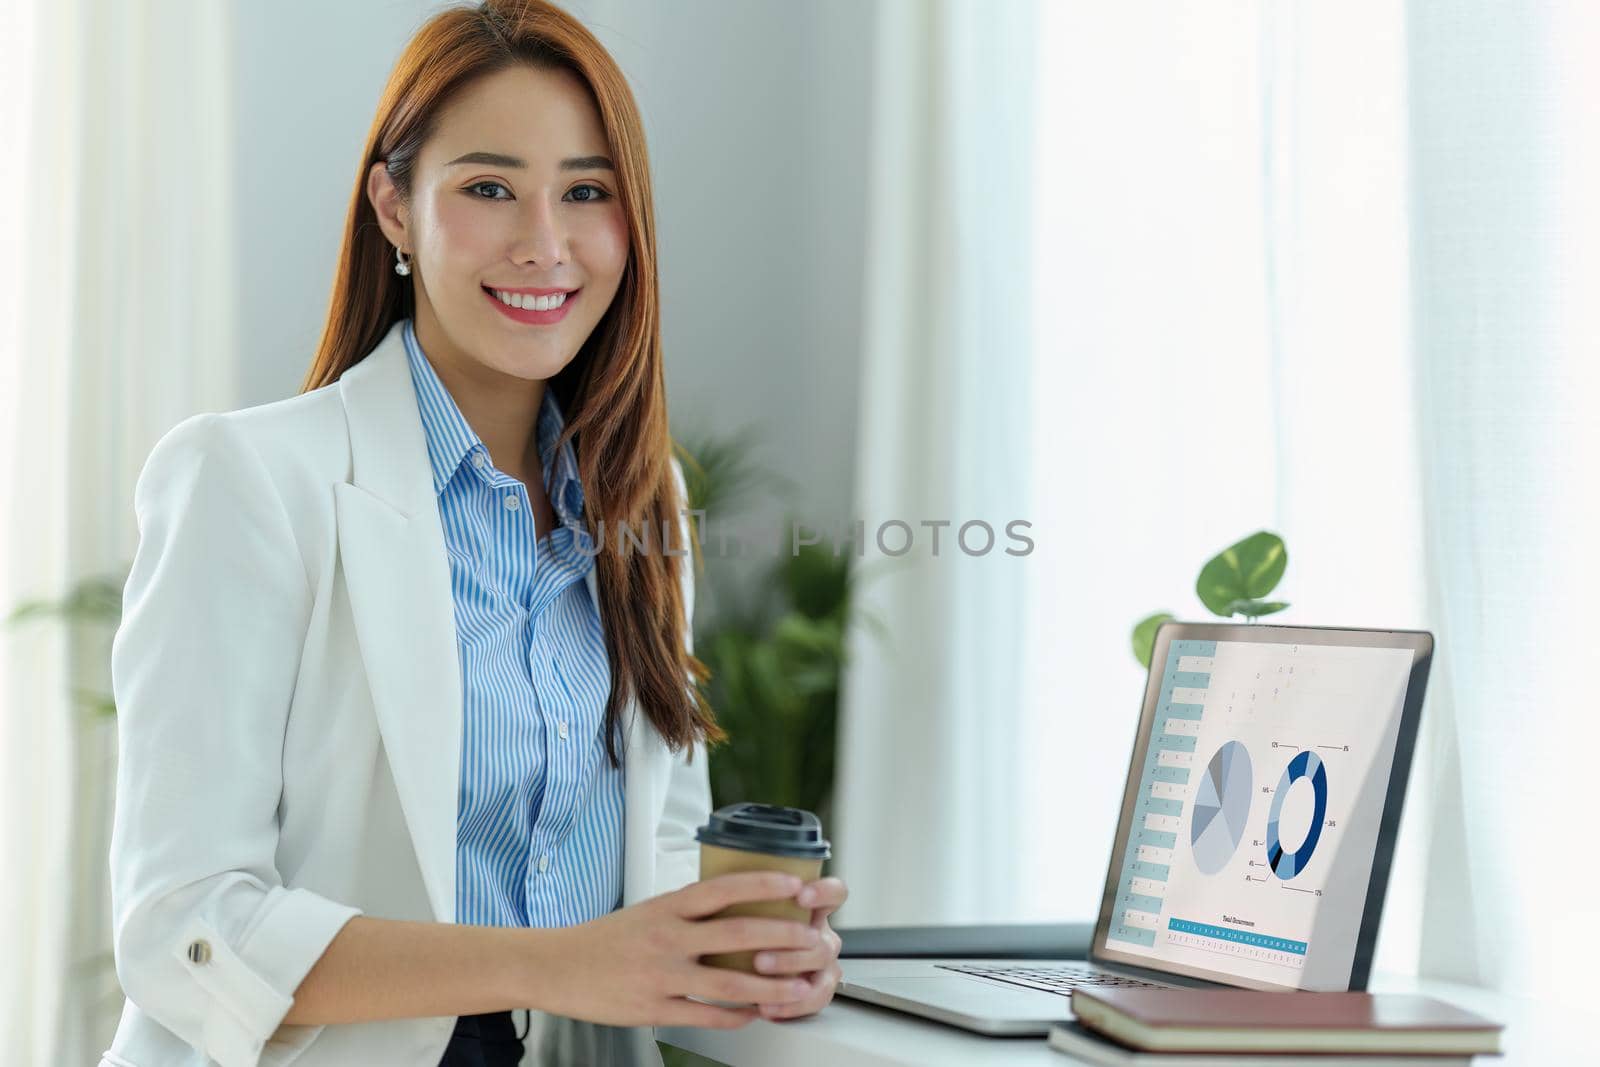 Portrait of an Asian business woman sitting at work and using a computer labtop in the office.